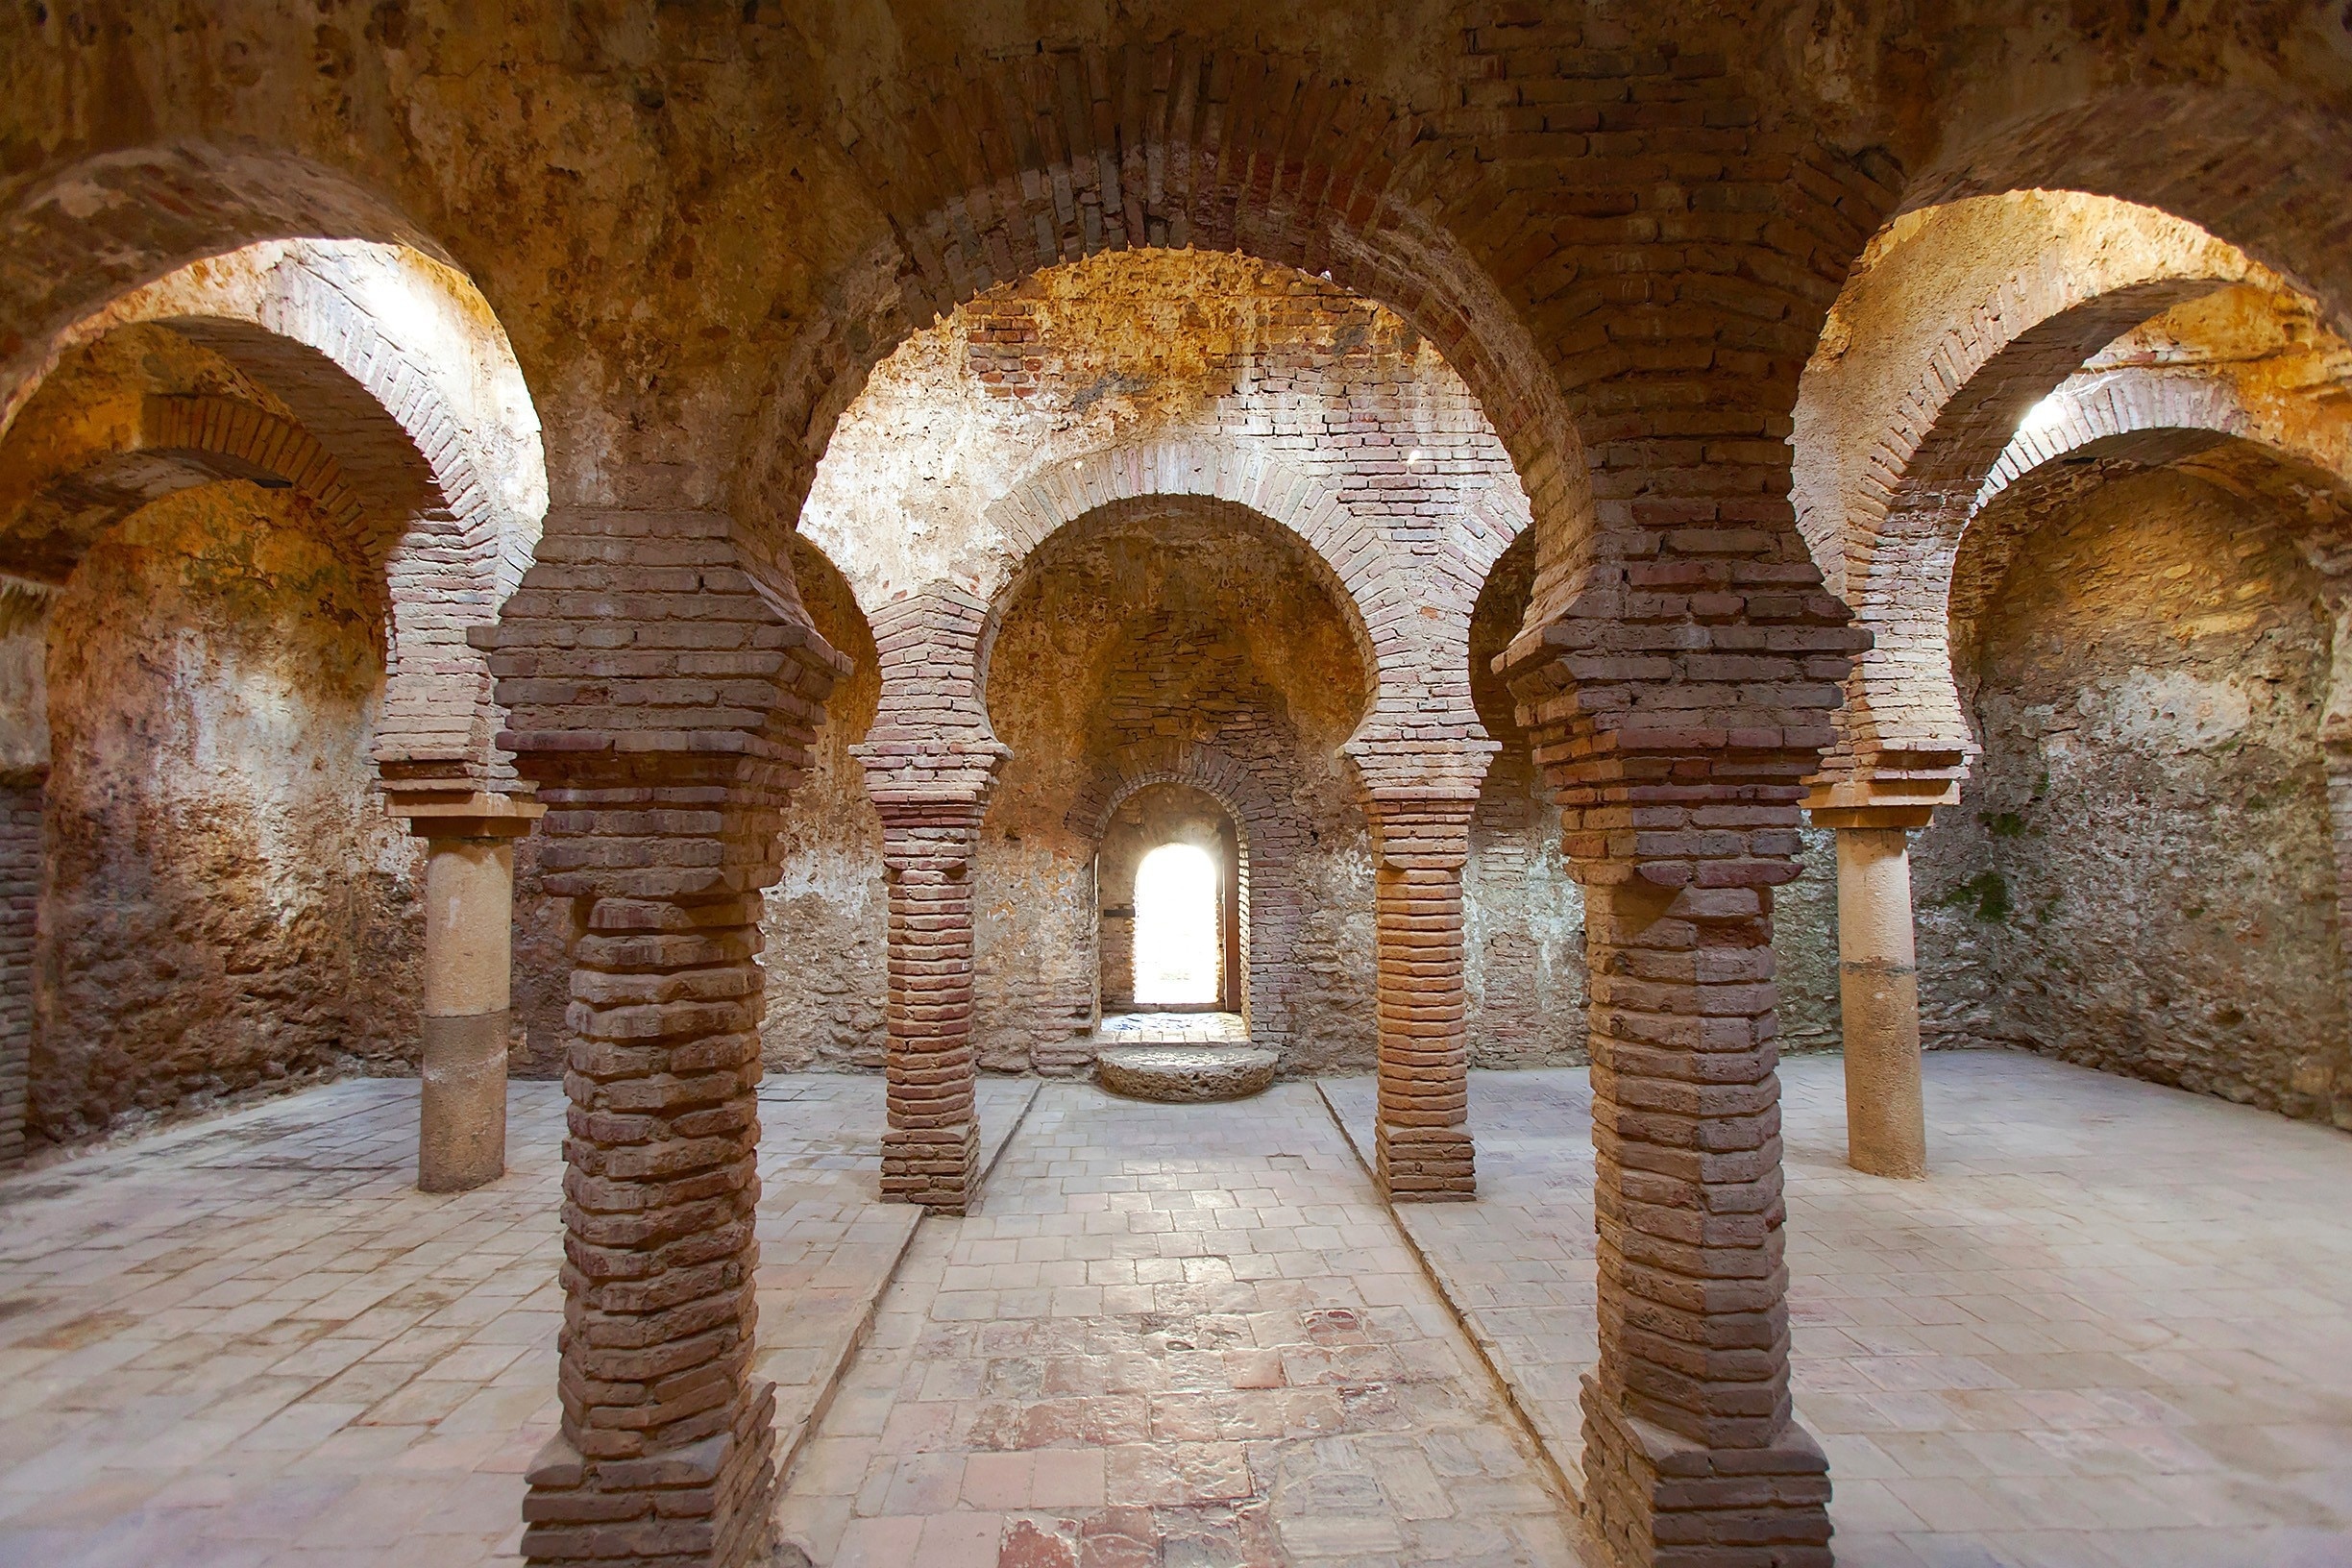 These 11th-century Arab baths are some of the best preserved in Europe.  They are situated outside the city walls near the oldest bridge, as it was a Muslin custom back then to purified one's self before entering the city.  You can visit the chambers - hot, mild, cold - and watch a short video detailing how they were stream fed and temperature-controlled.